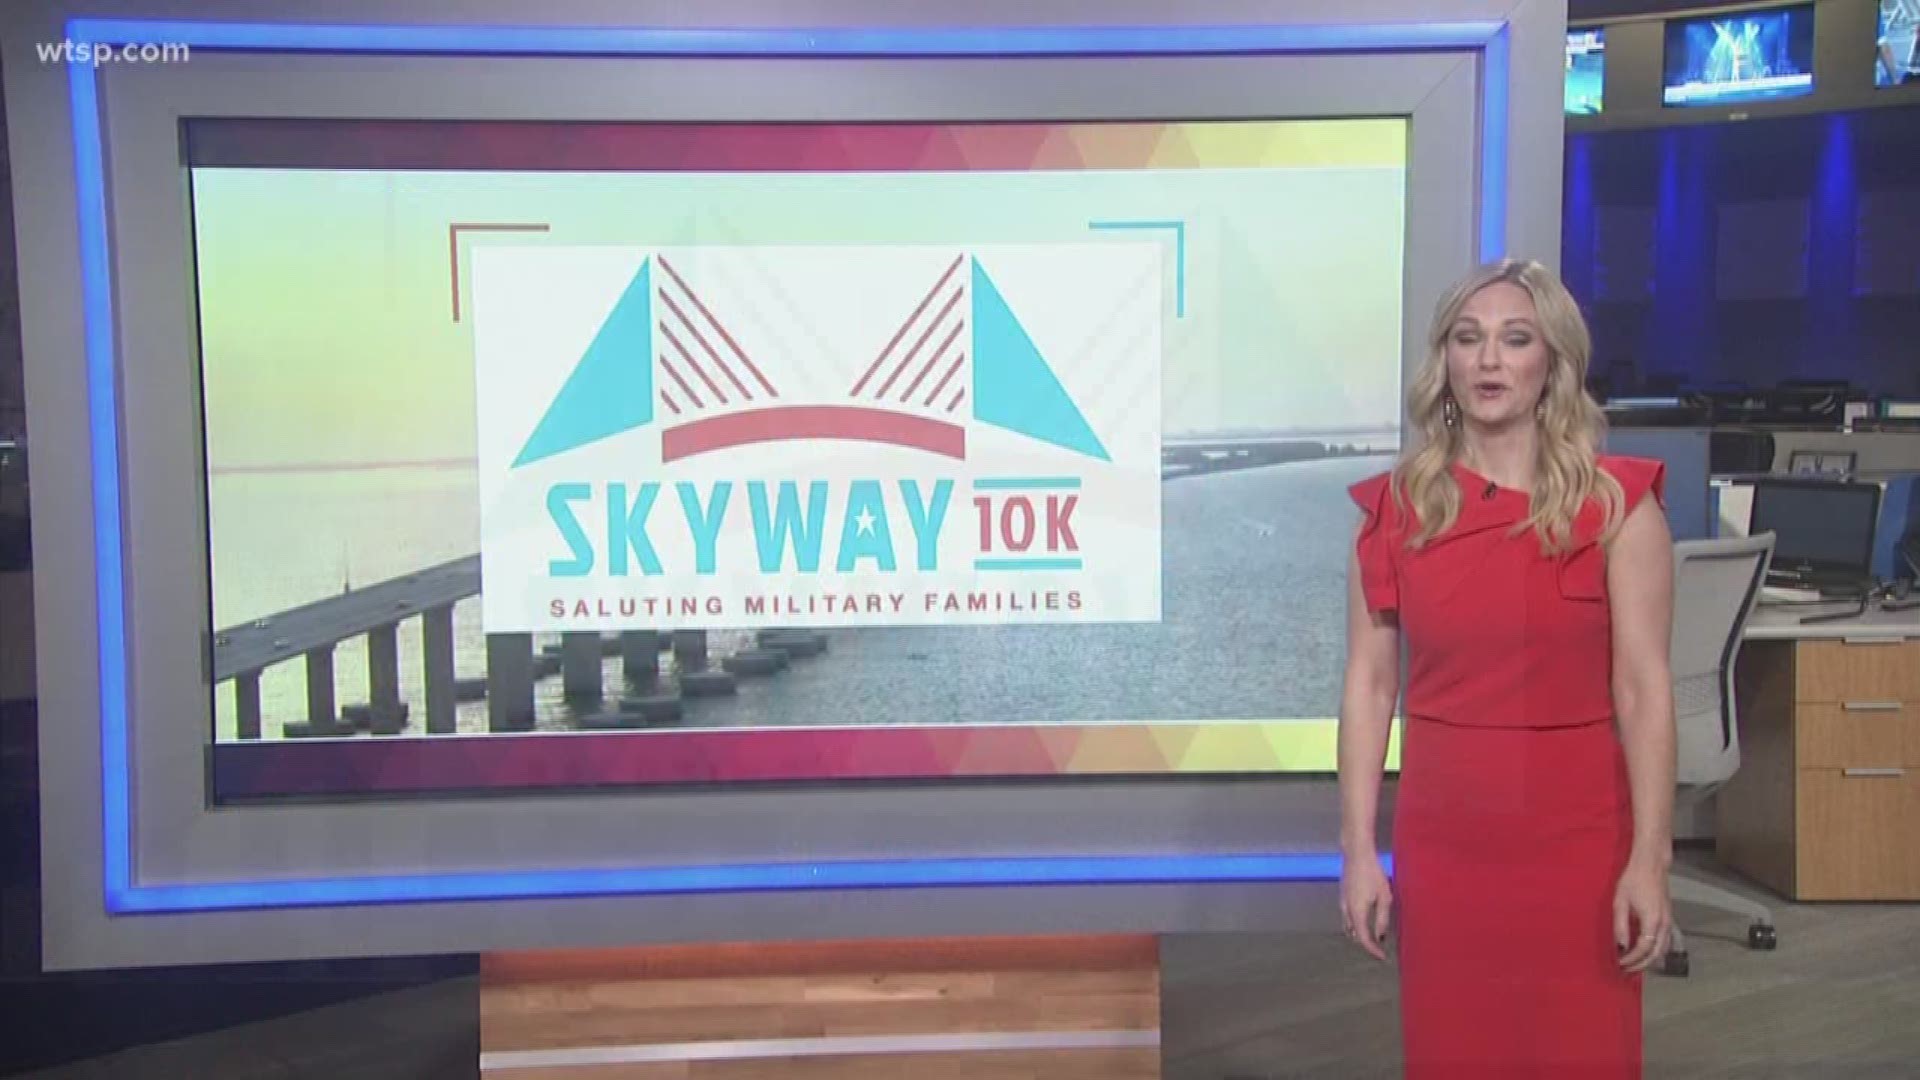 50 V.I.P. registrations still available for the 2020 Skyway 10K.